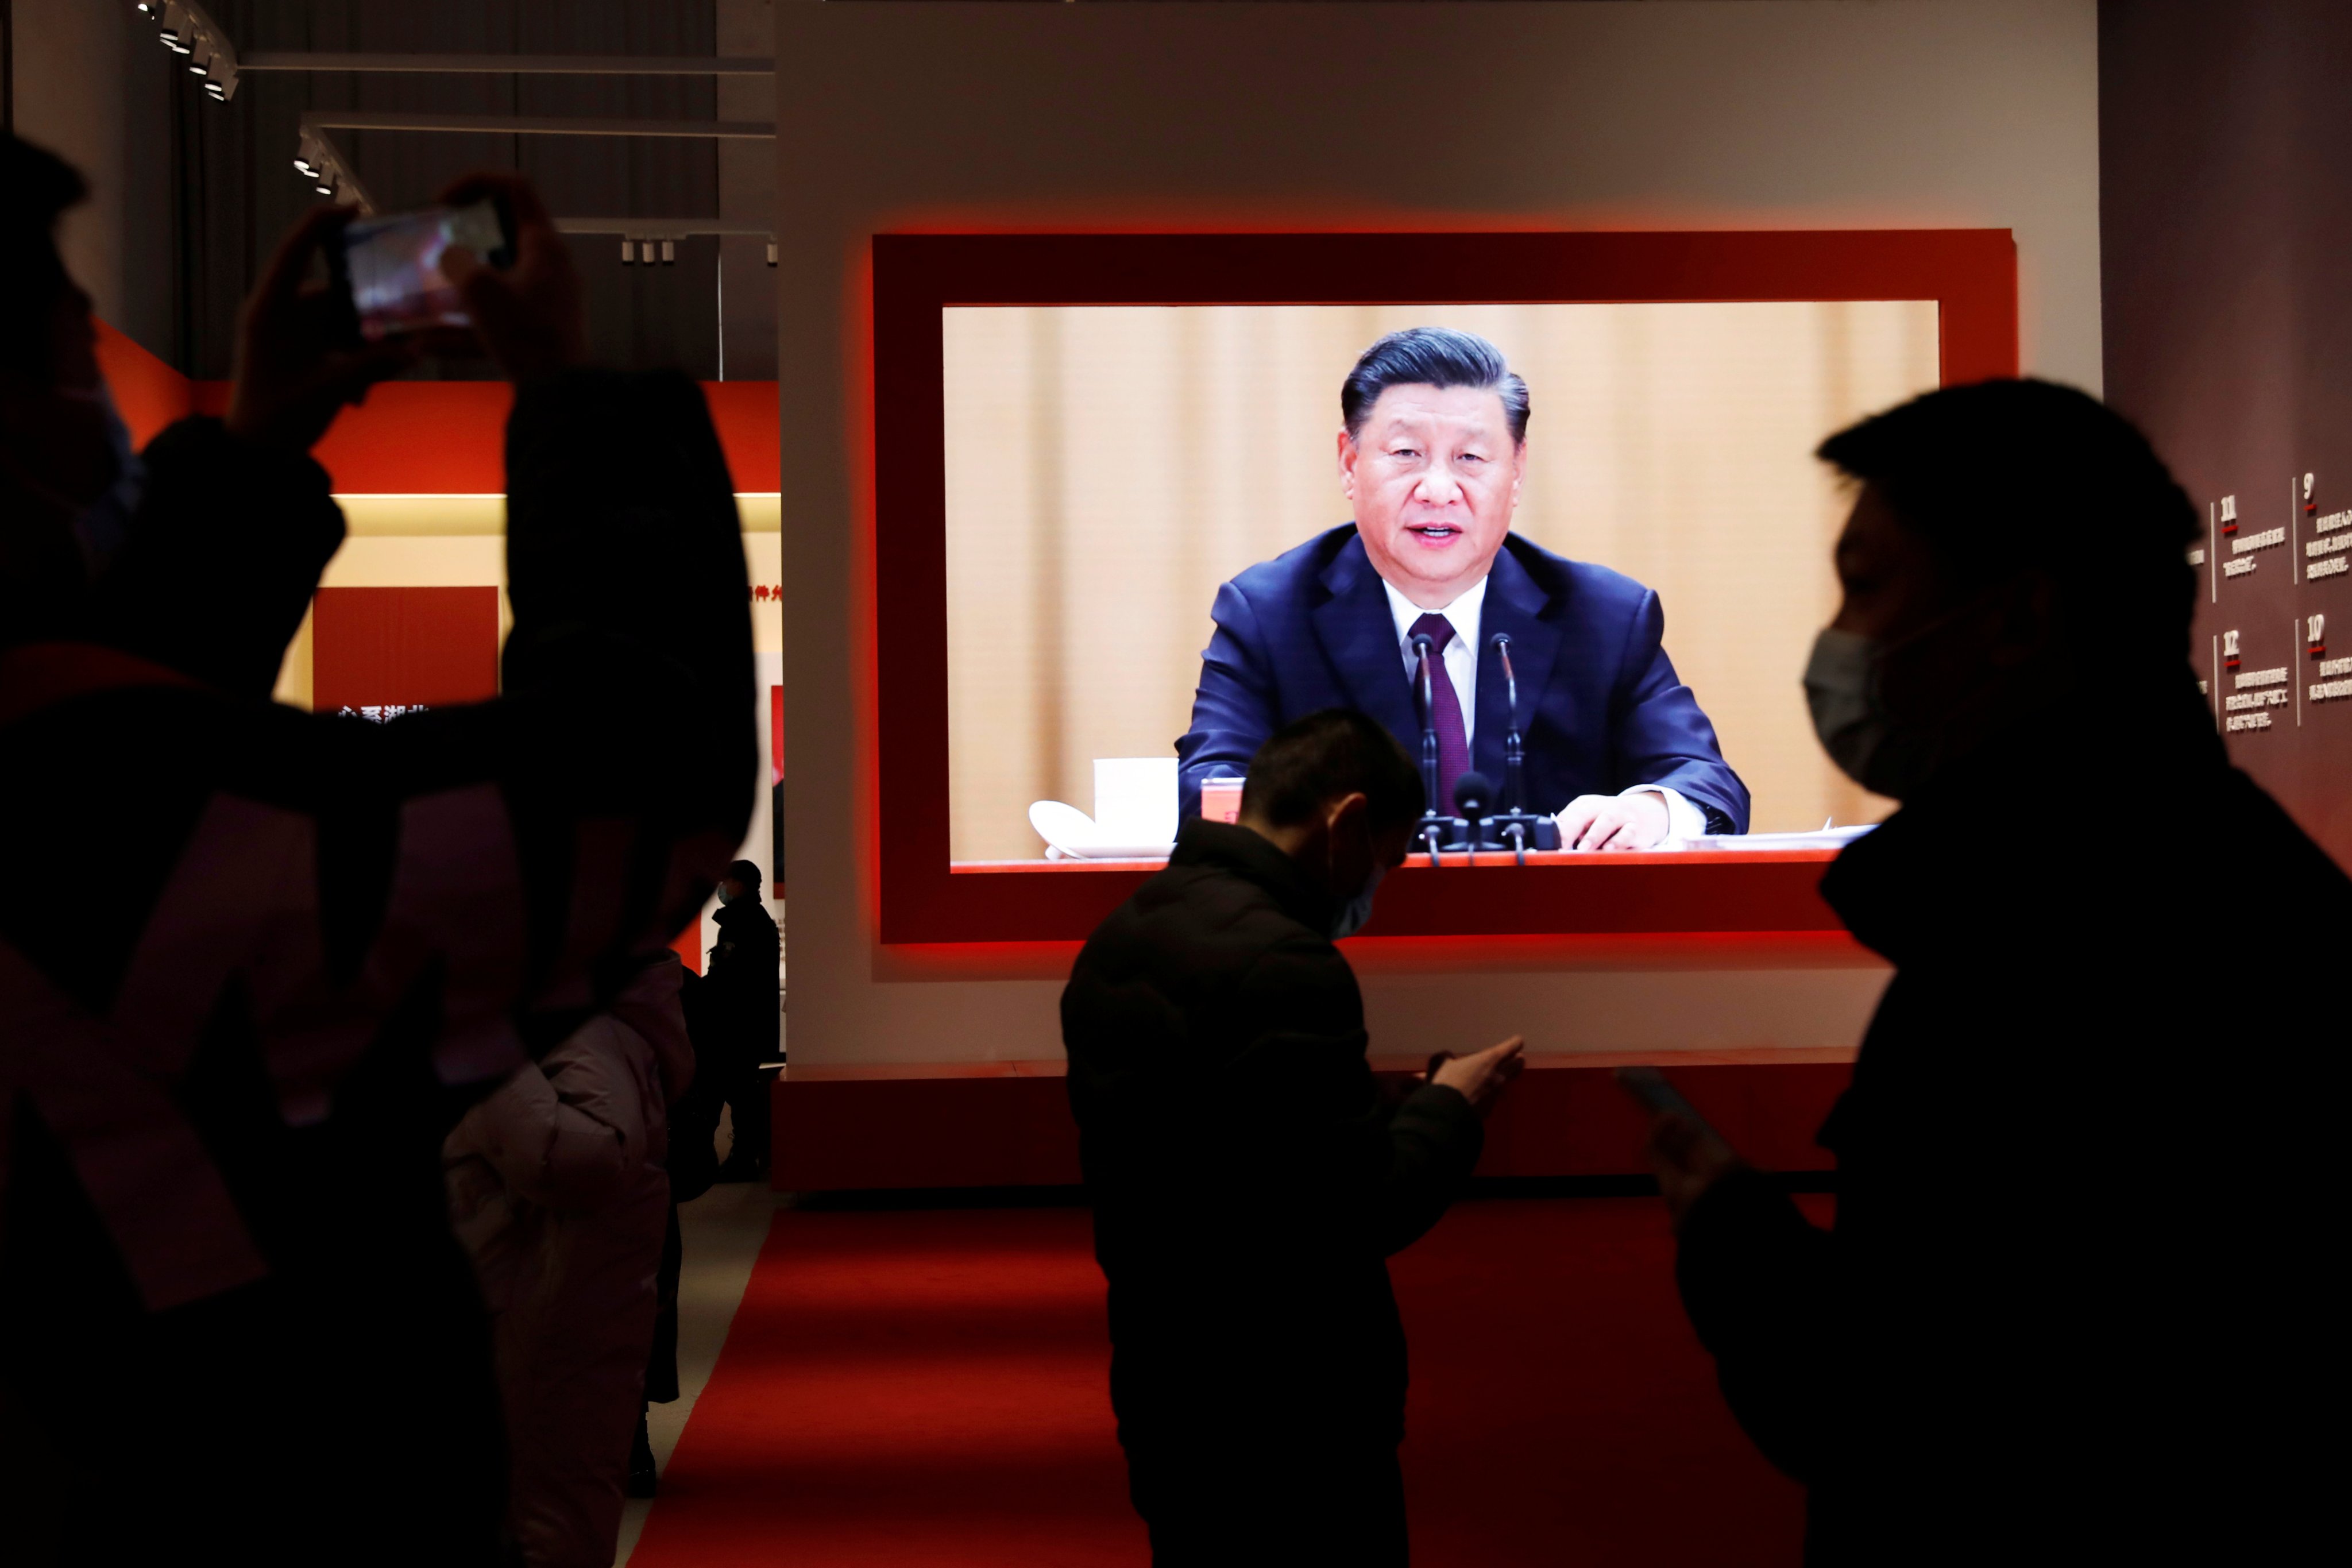 Xi Jinping has reshaped China’s economy since becoming president in 2013. Photo: Reuters